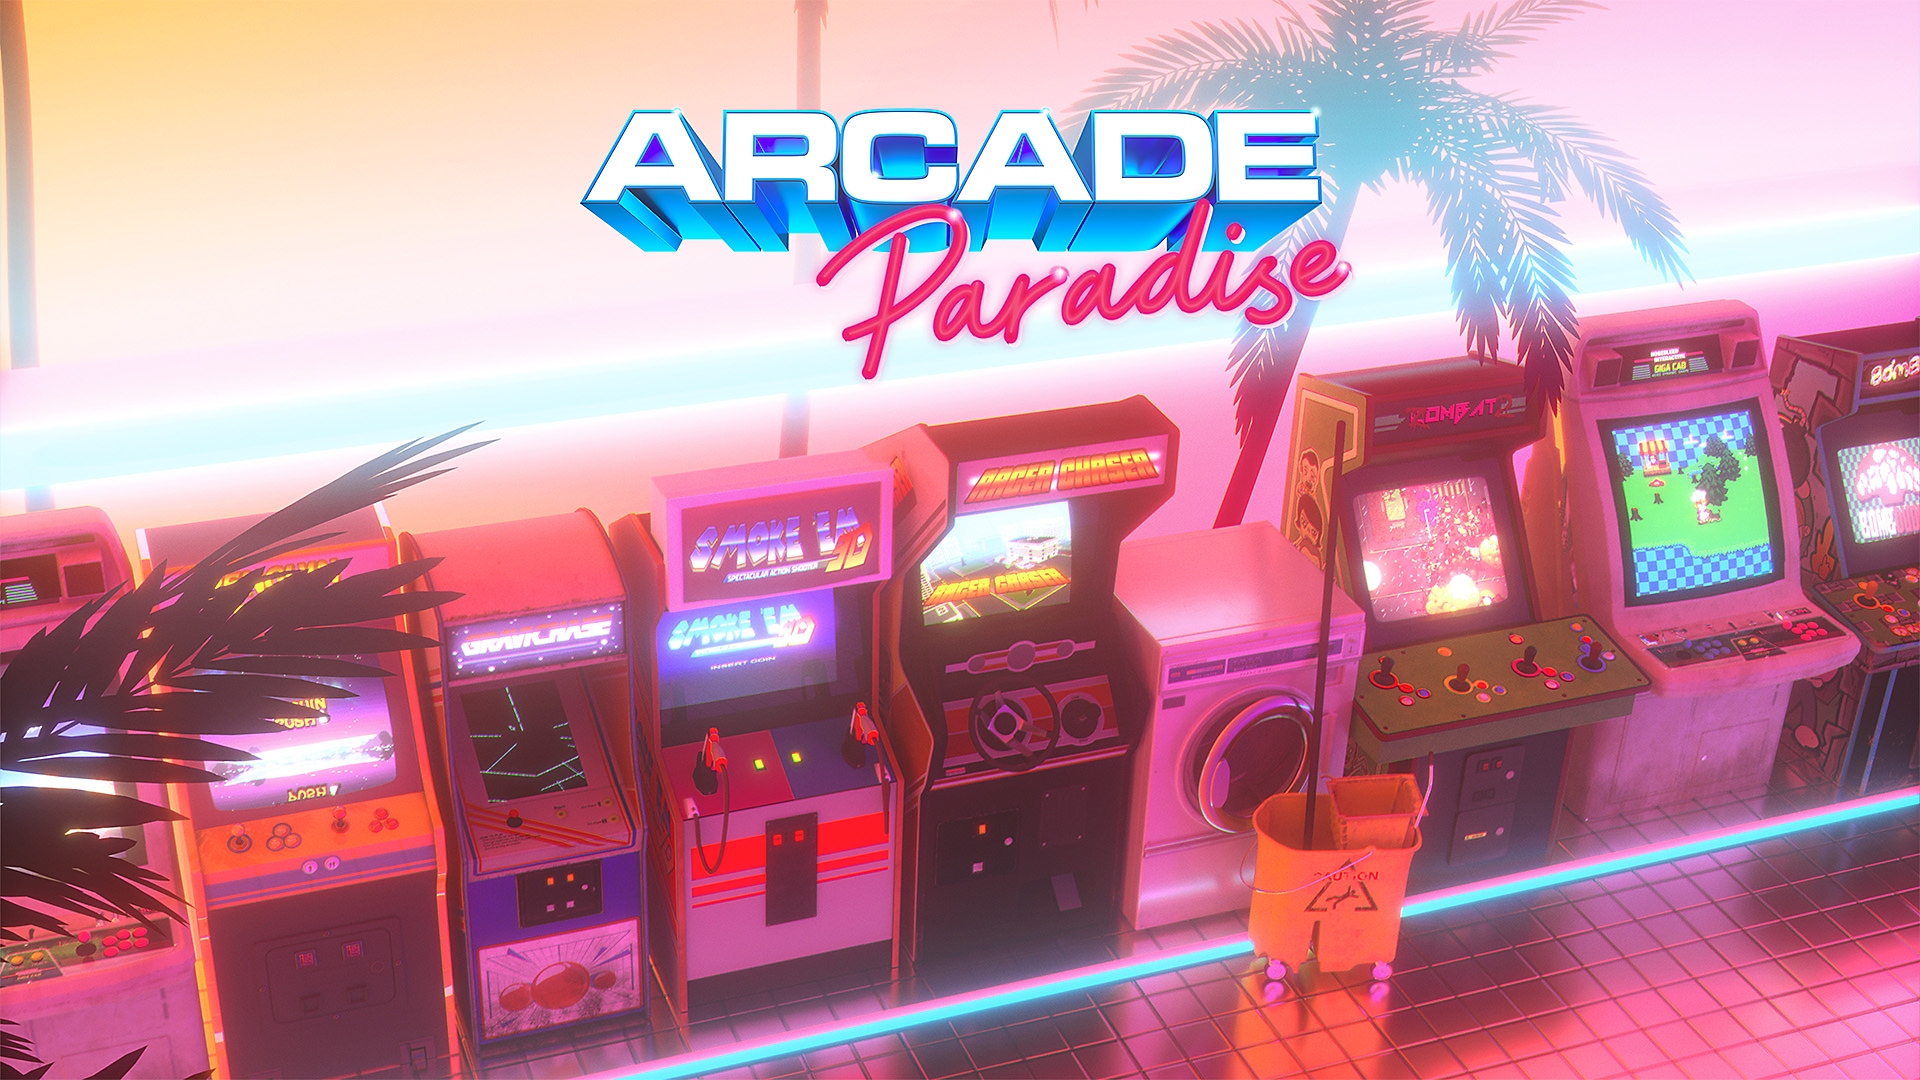 Arcade Paradise - Launch Trailer | PS5 & PS4 Games